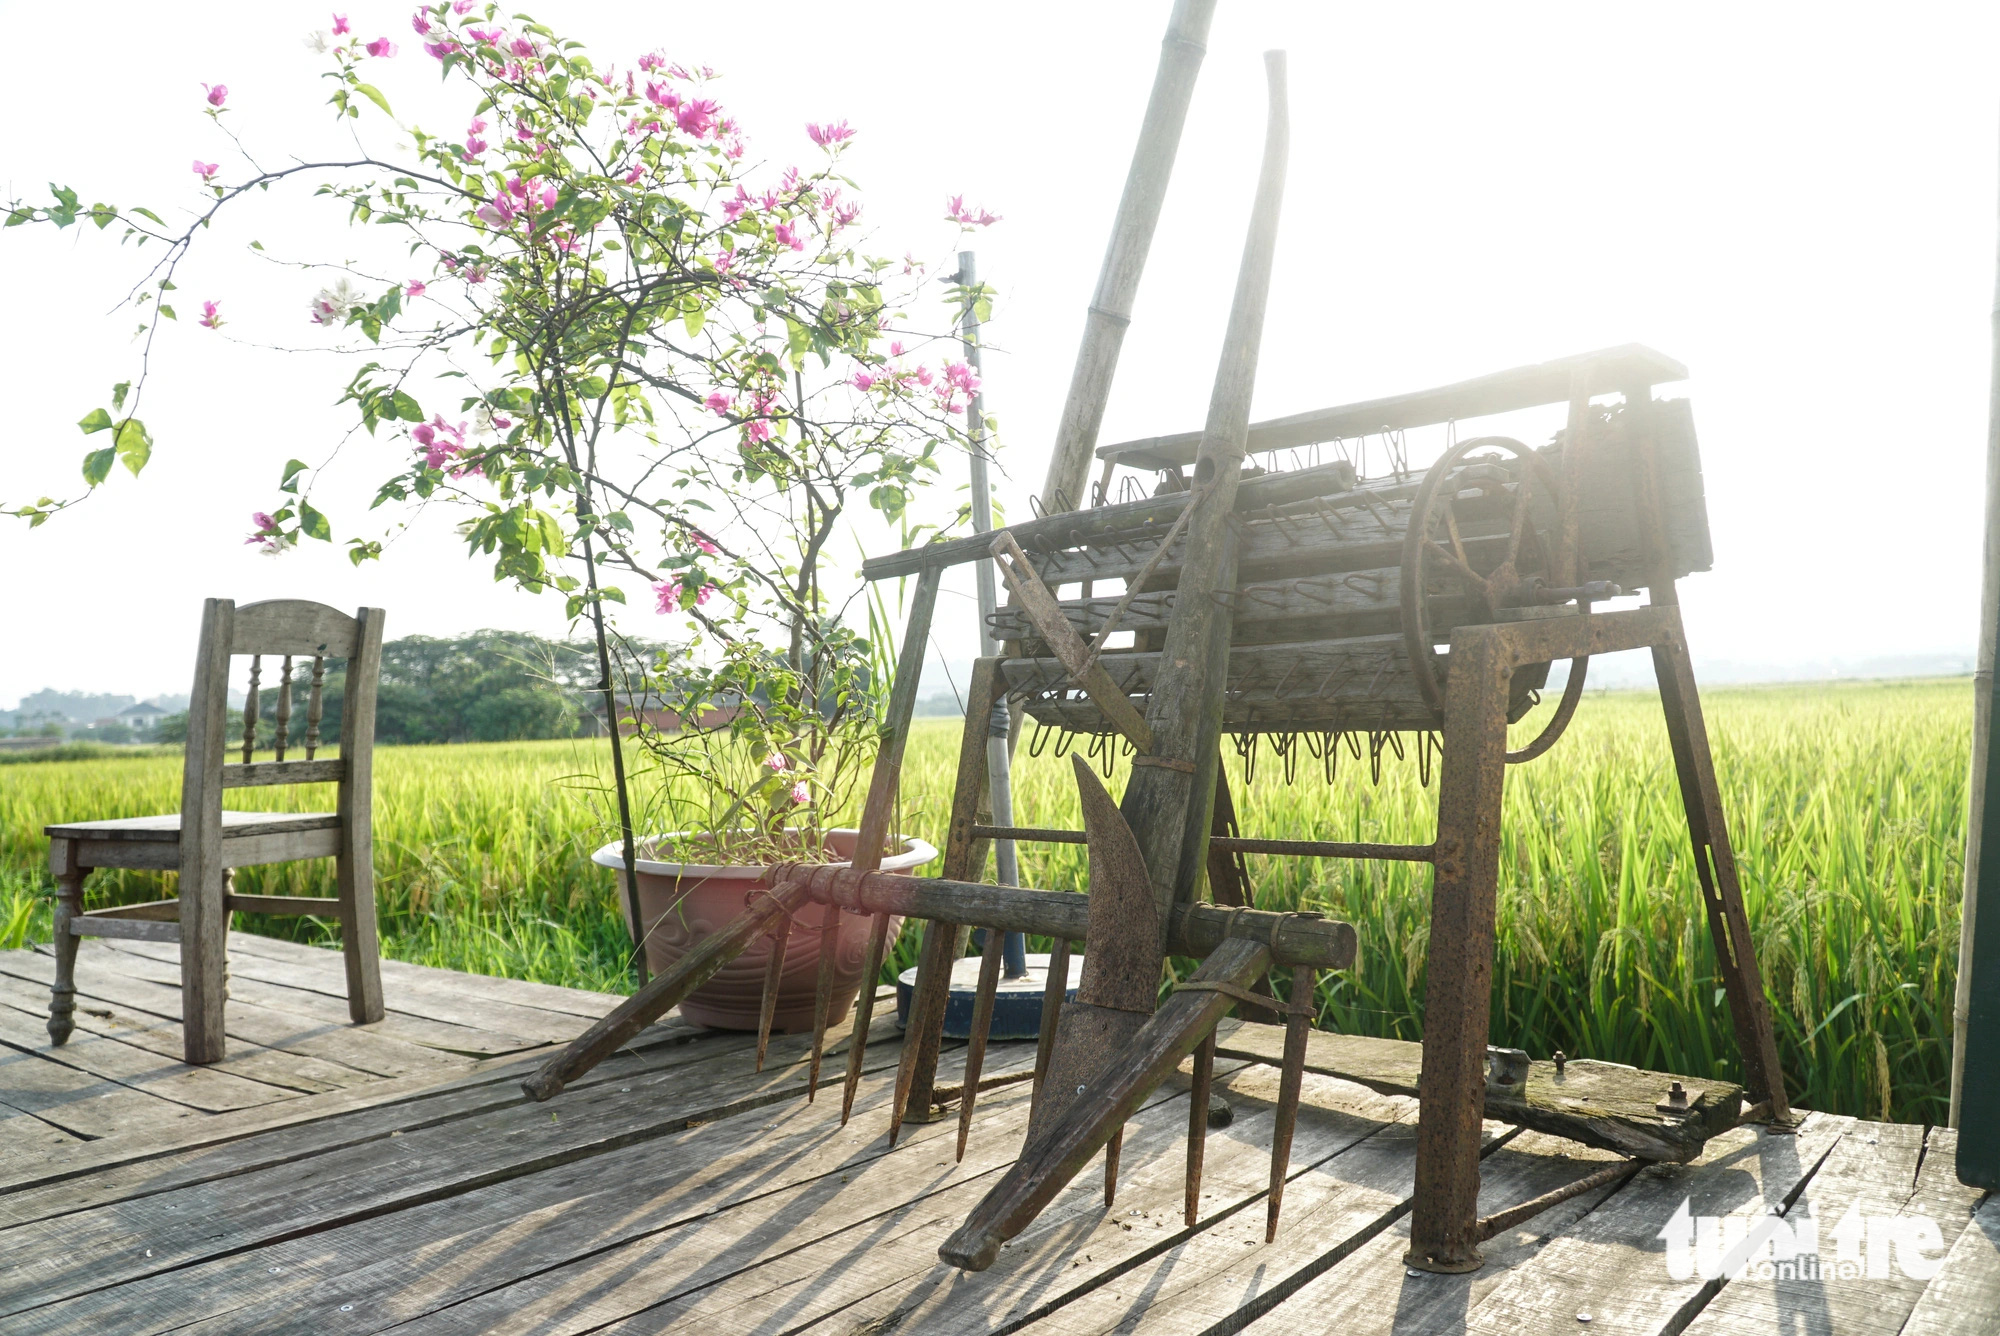 An antique plow, harrow, and threshing machine are on display at a rustic café amid the rice fields in Phung Chau Commune, Chuong My District, Hanoi. Photo: Nguyen Hien / Tuoi Tre